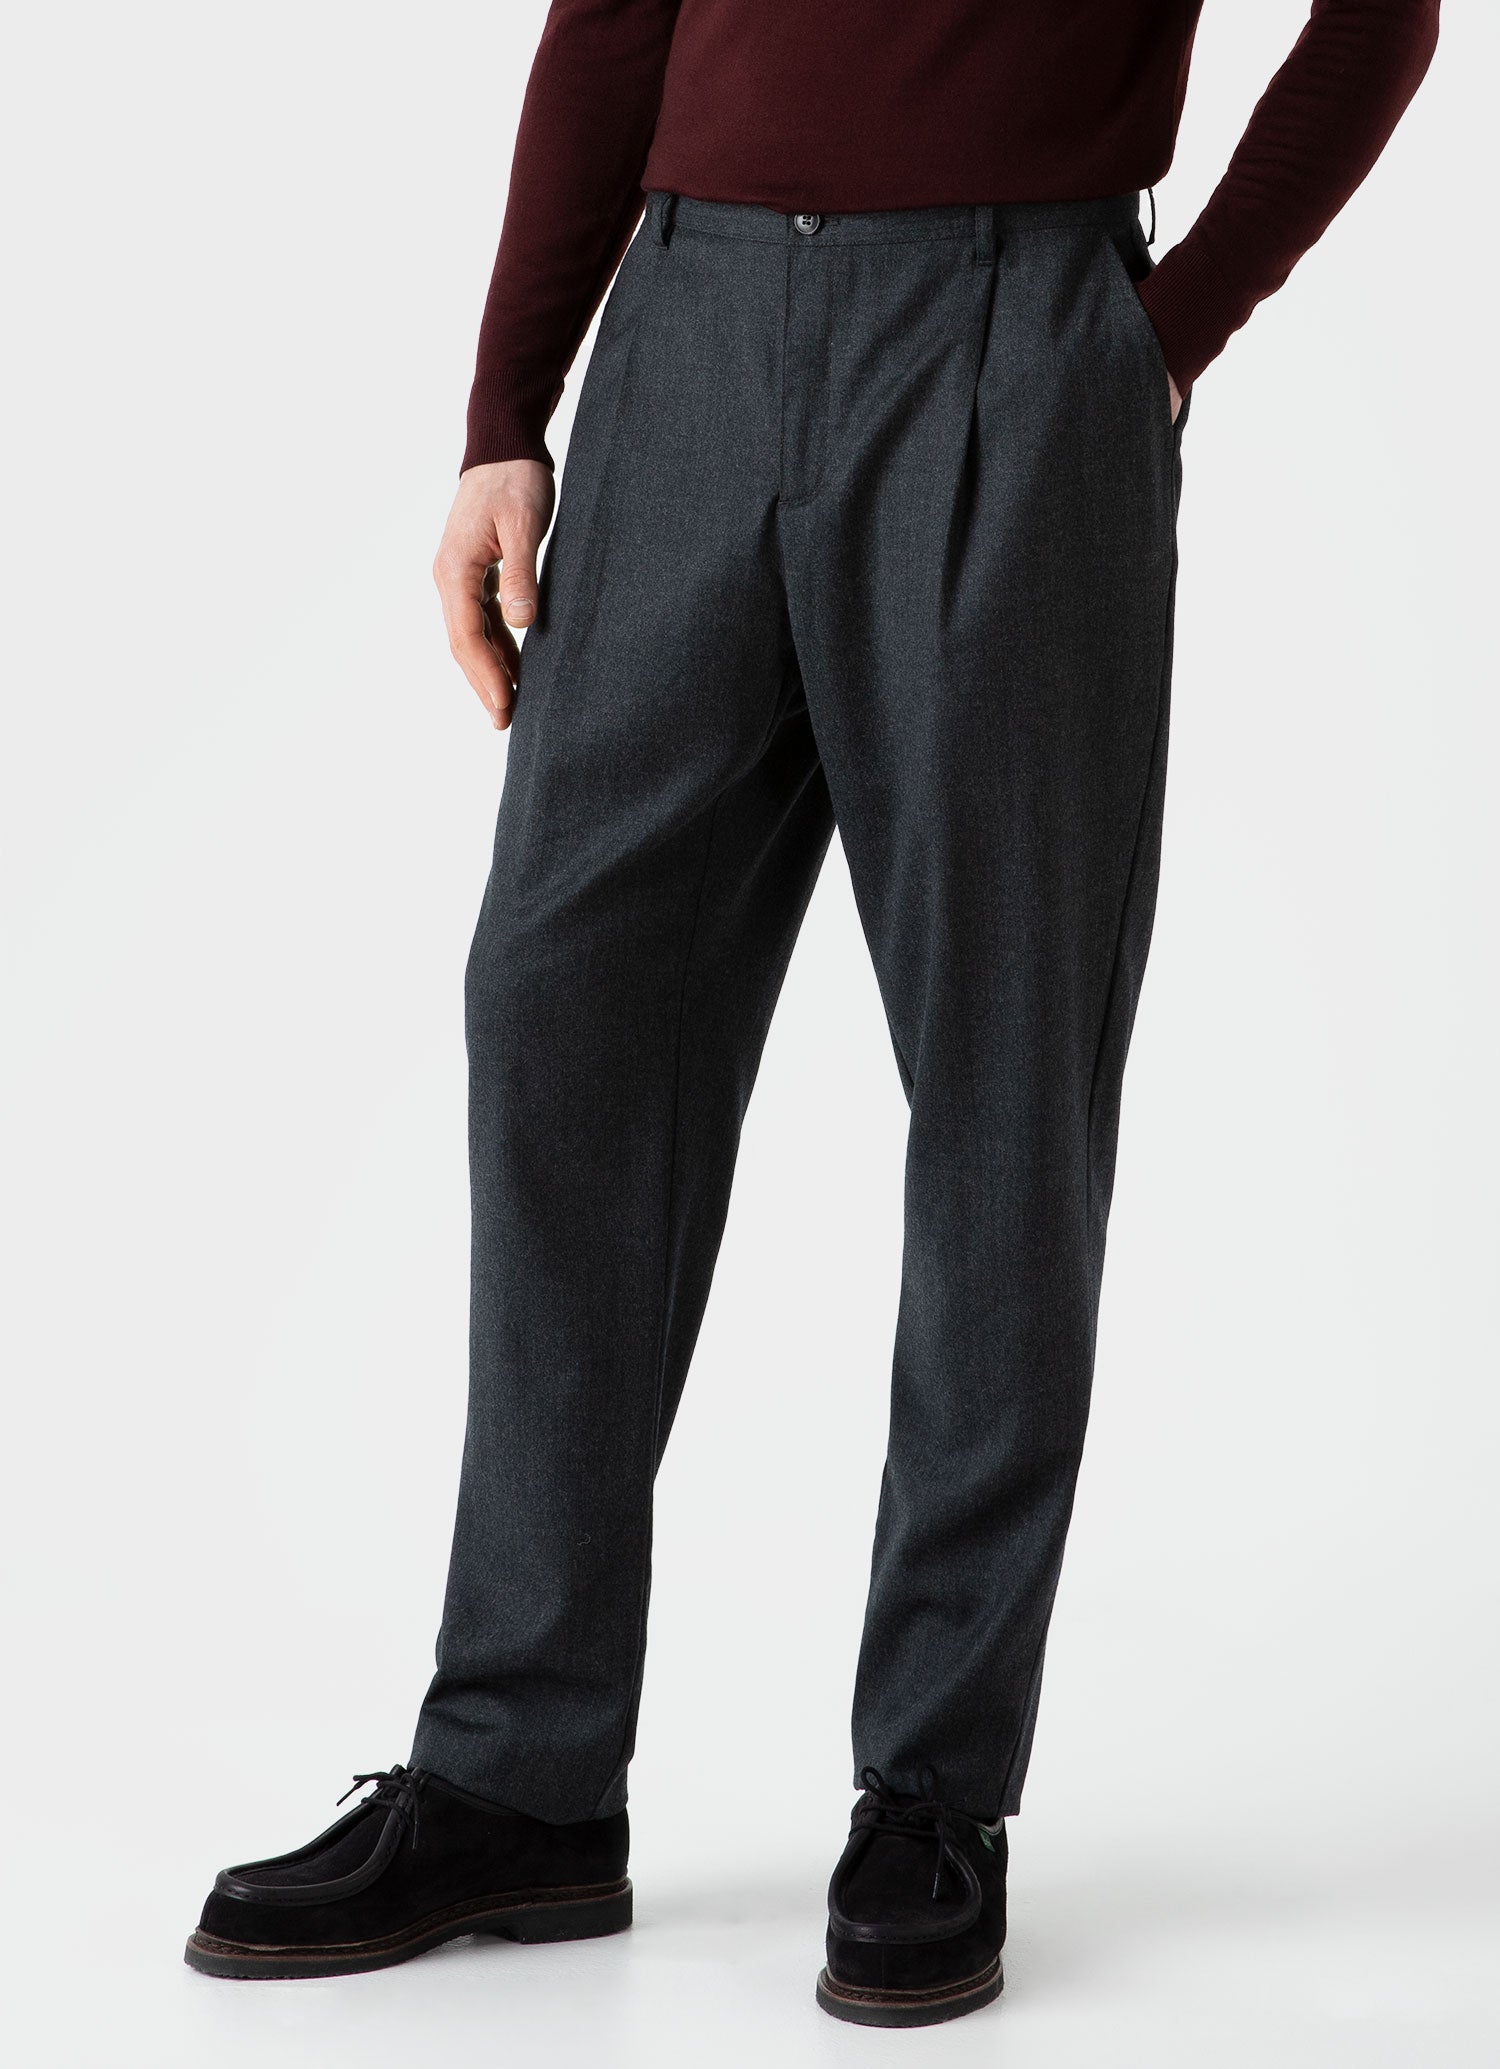 Charcoal Wool Dress Pant - Custom Fit Tailored Clothing